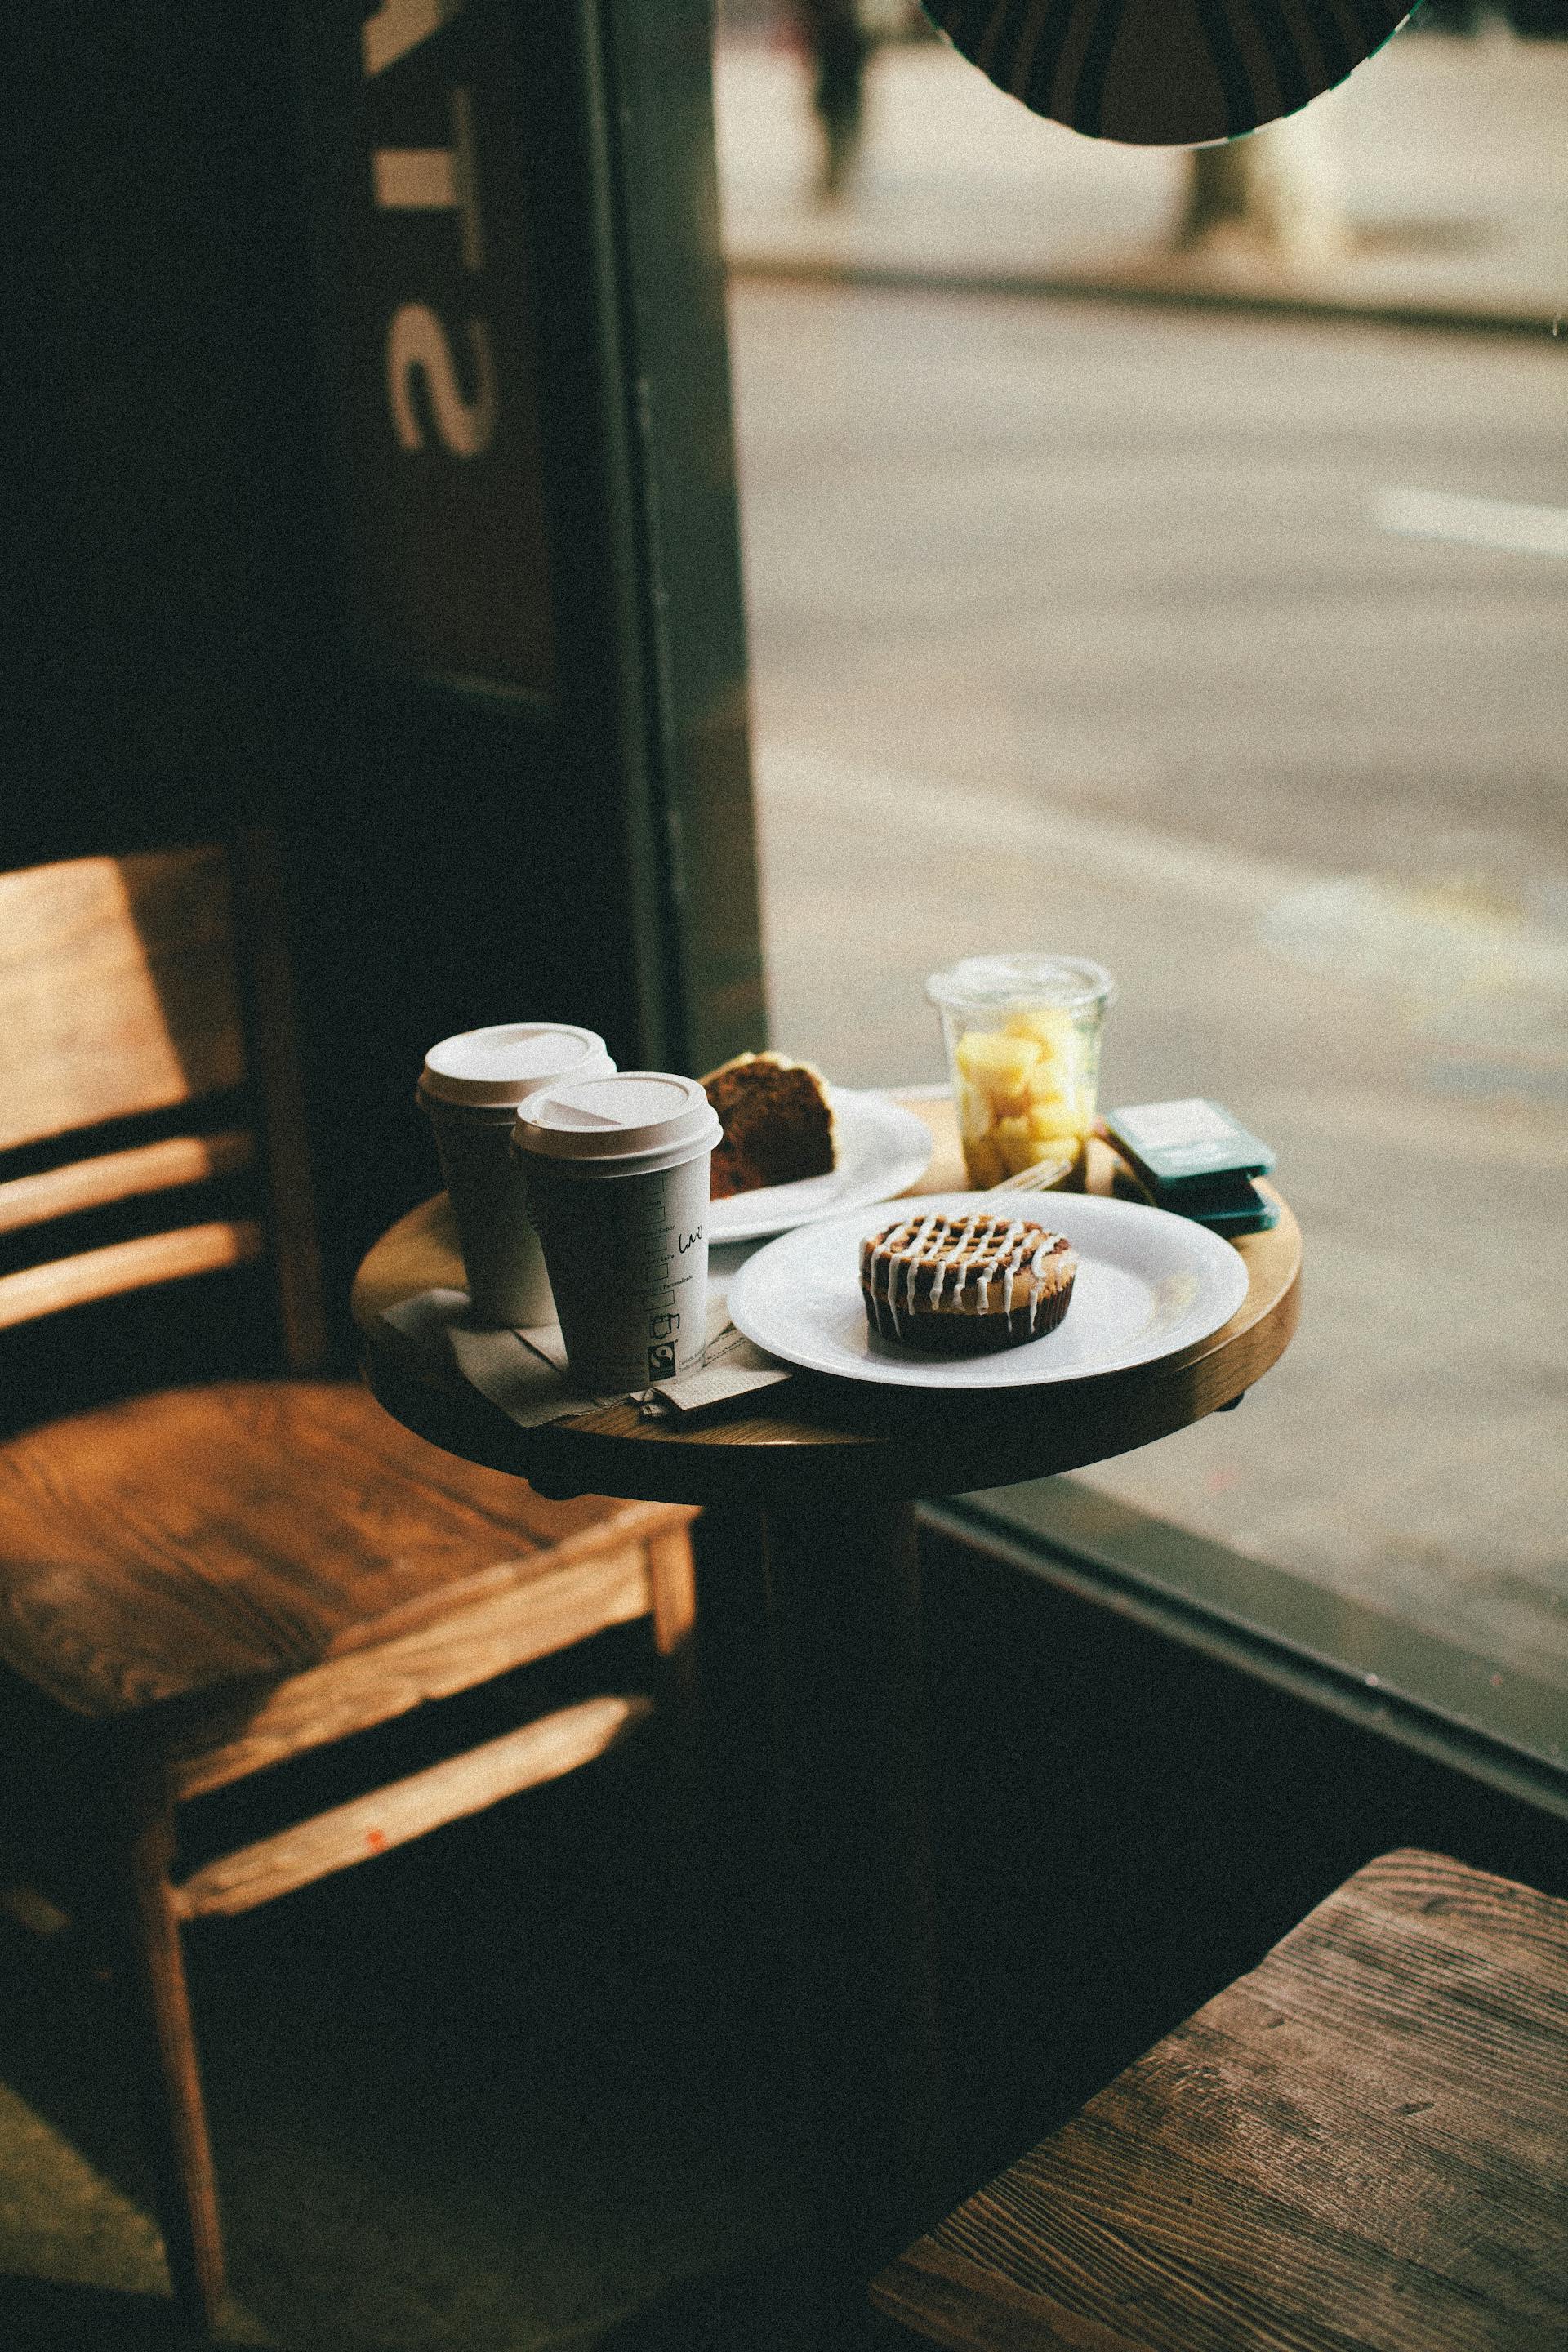 A table in a coffee shop | Source: Pexels